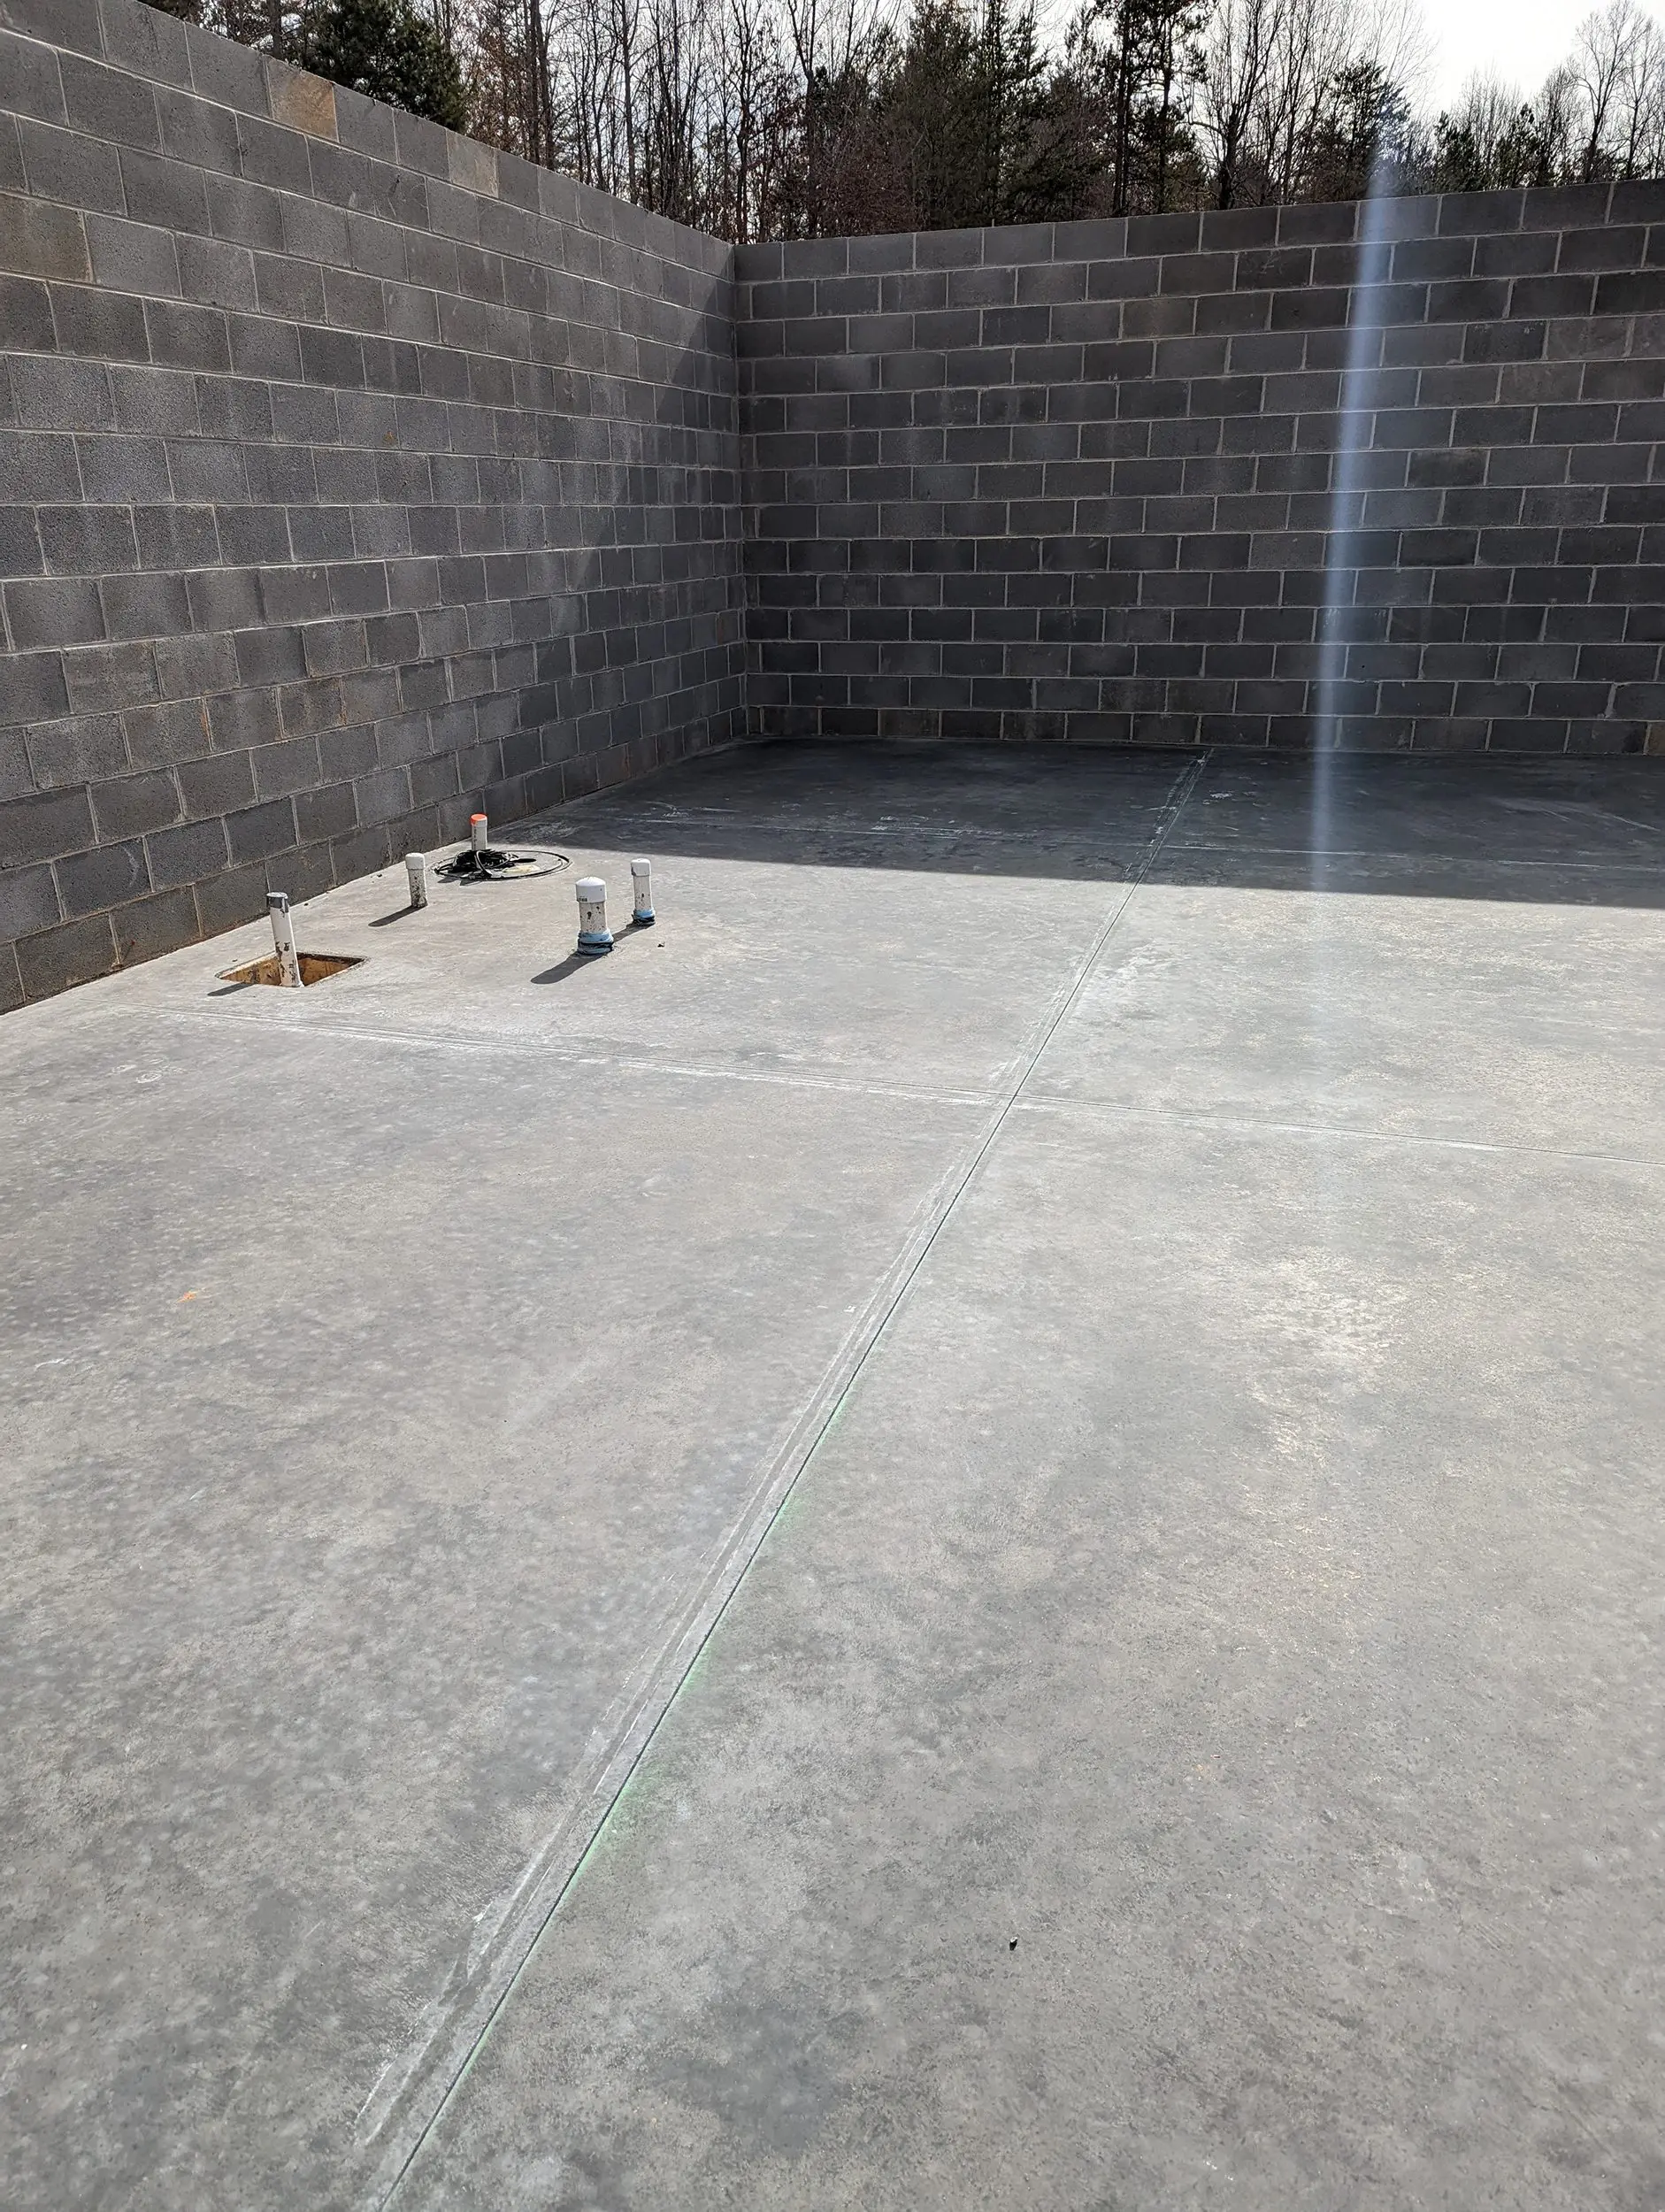 Newly constructed bare concrete floor in a basement awaiting staining